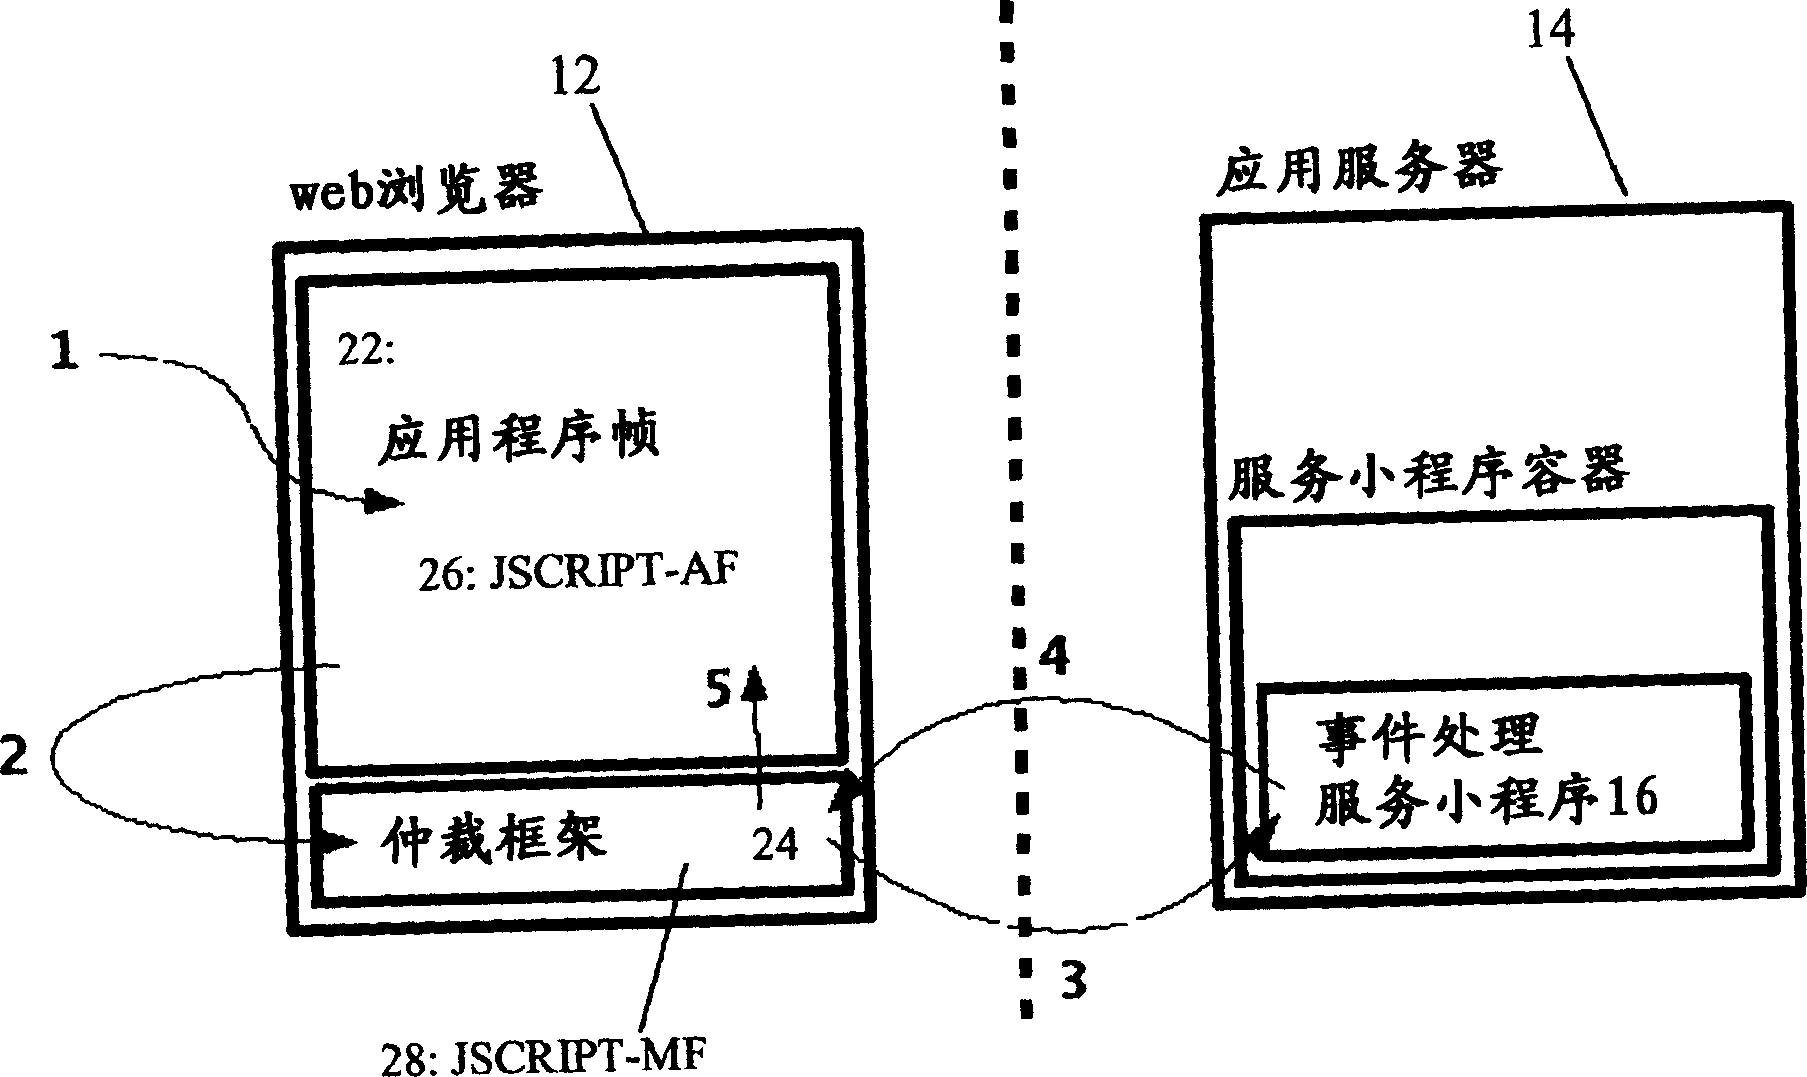 Method for the server side processing of user interactions with a web-browser